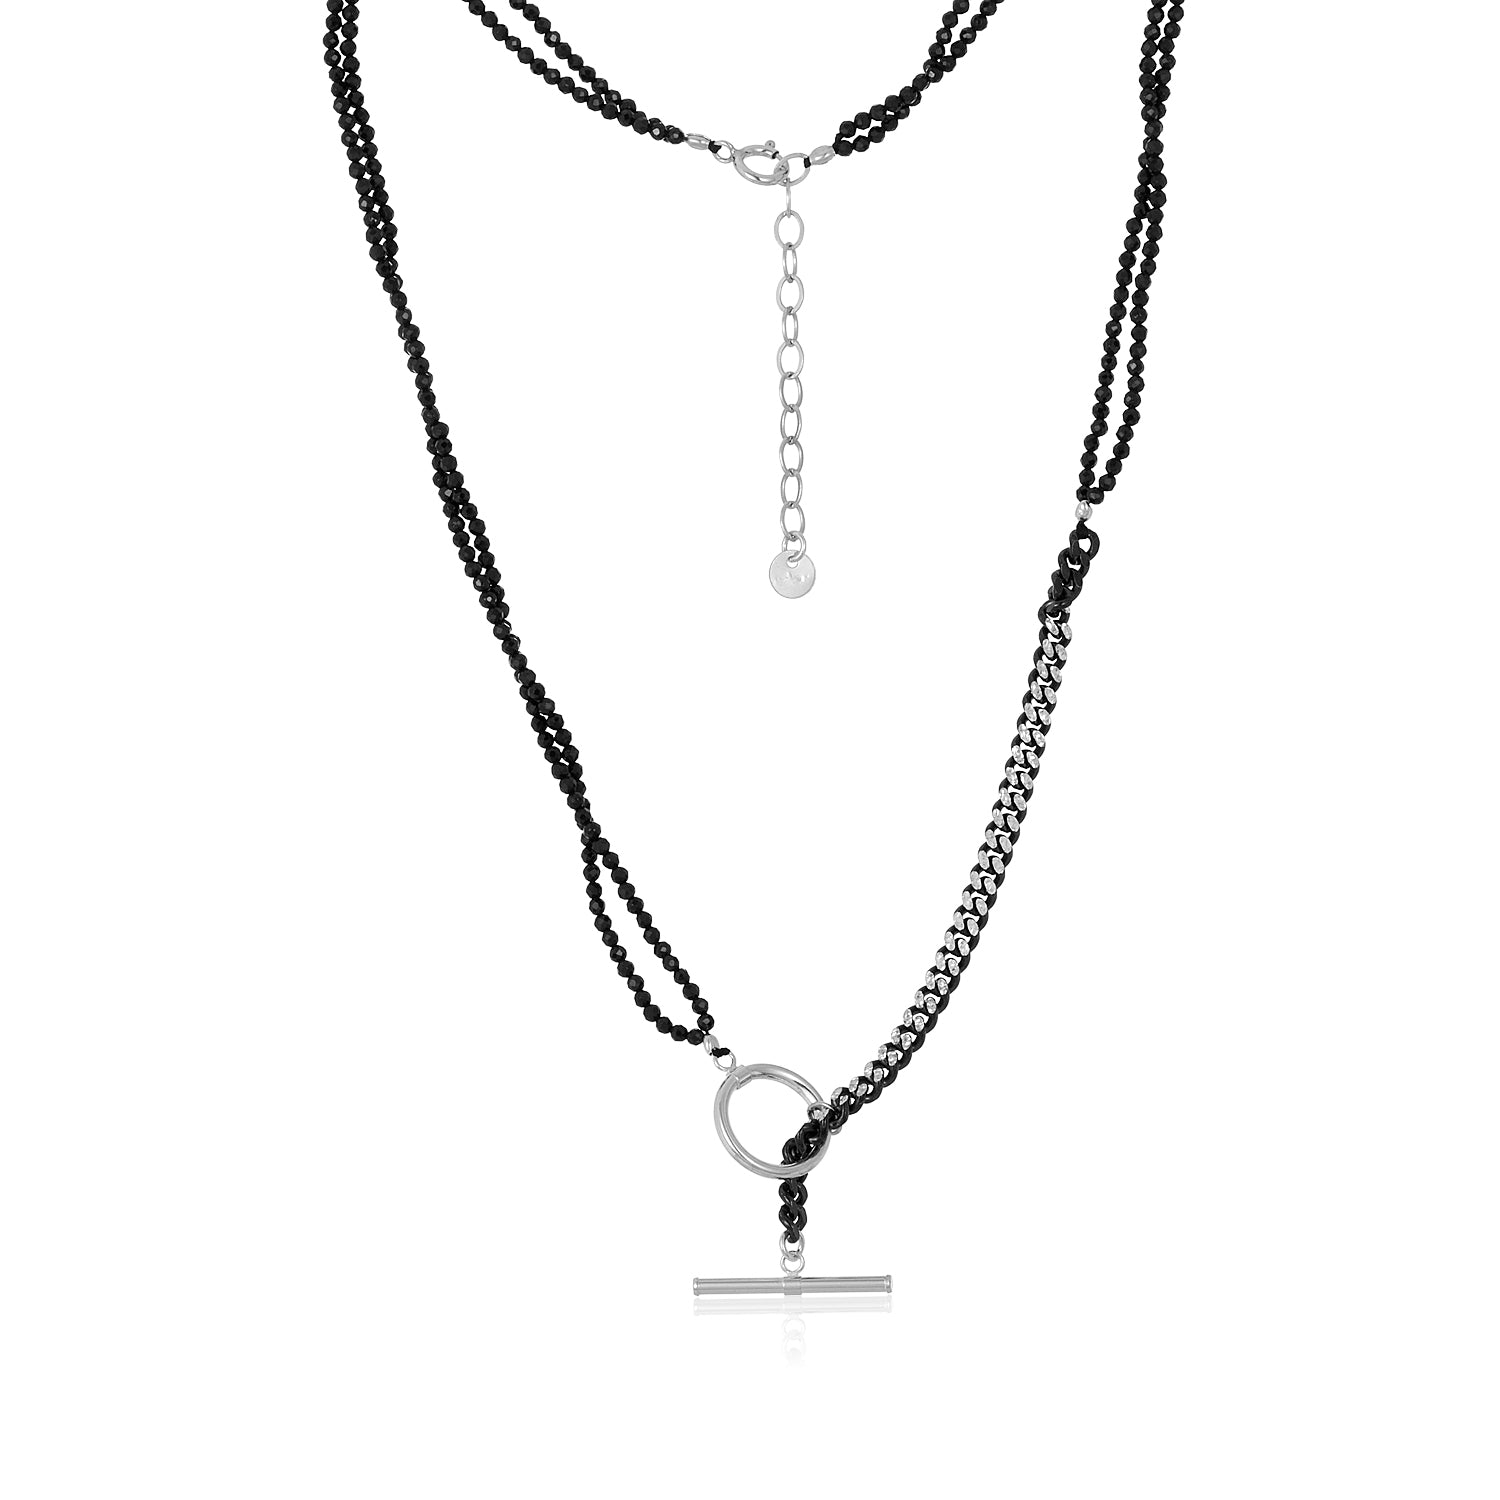 Black Spinel Double Edge Silver Necklace